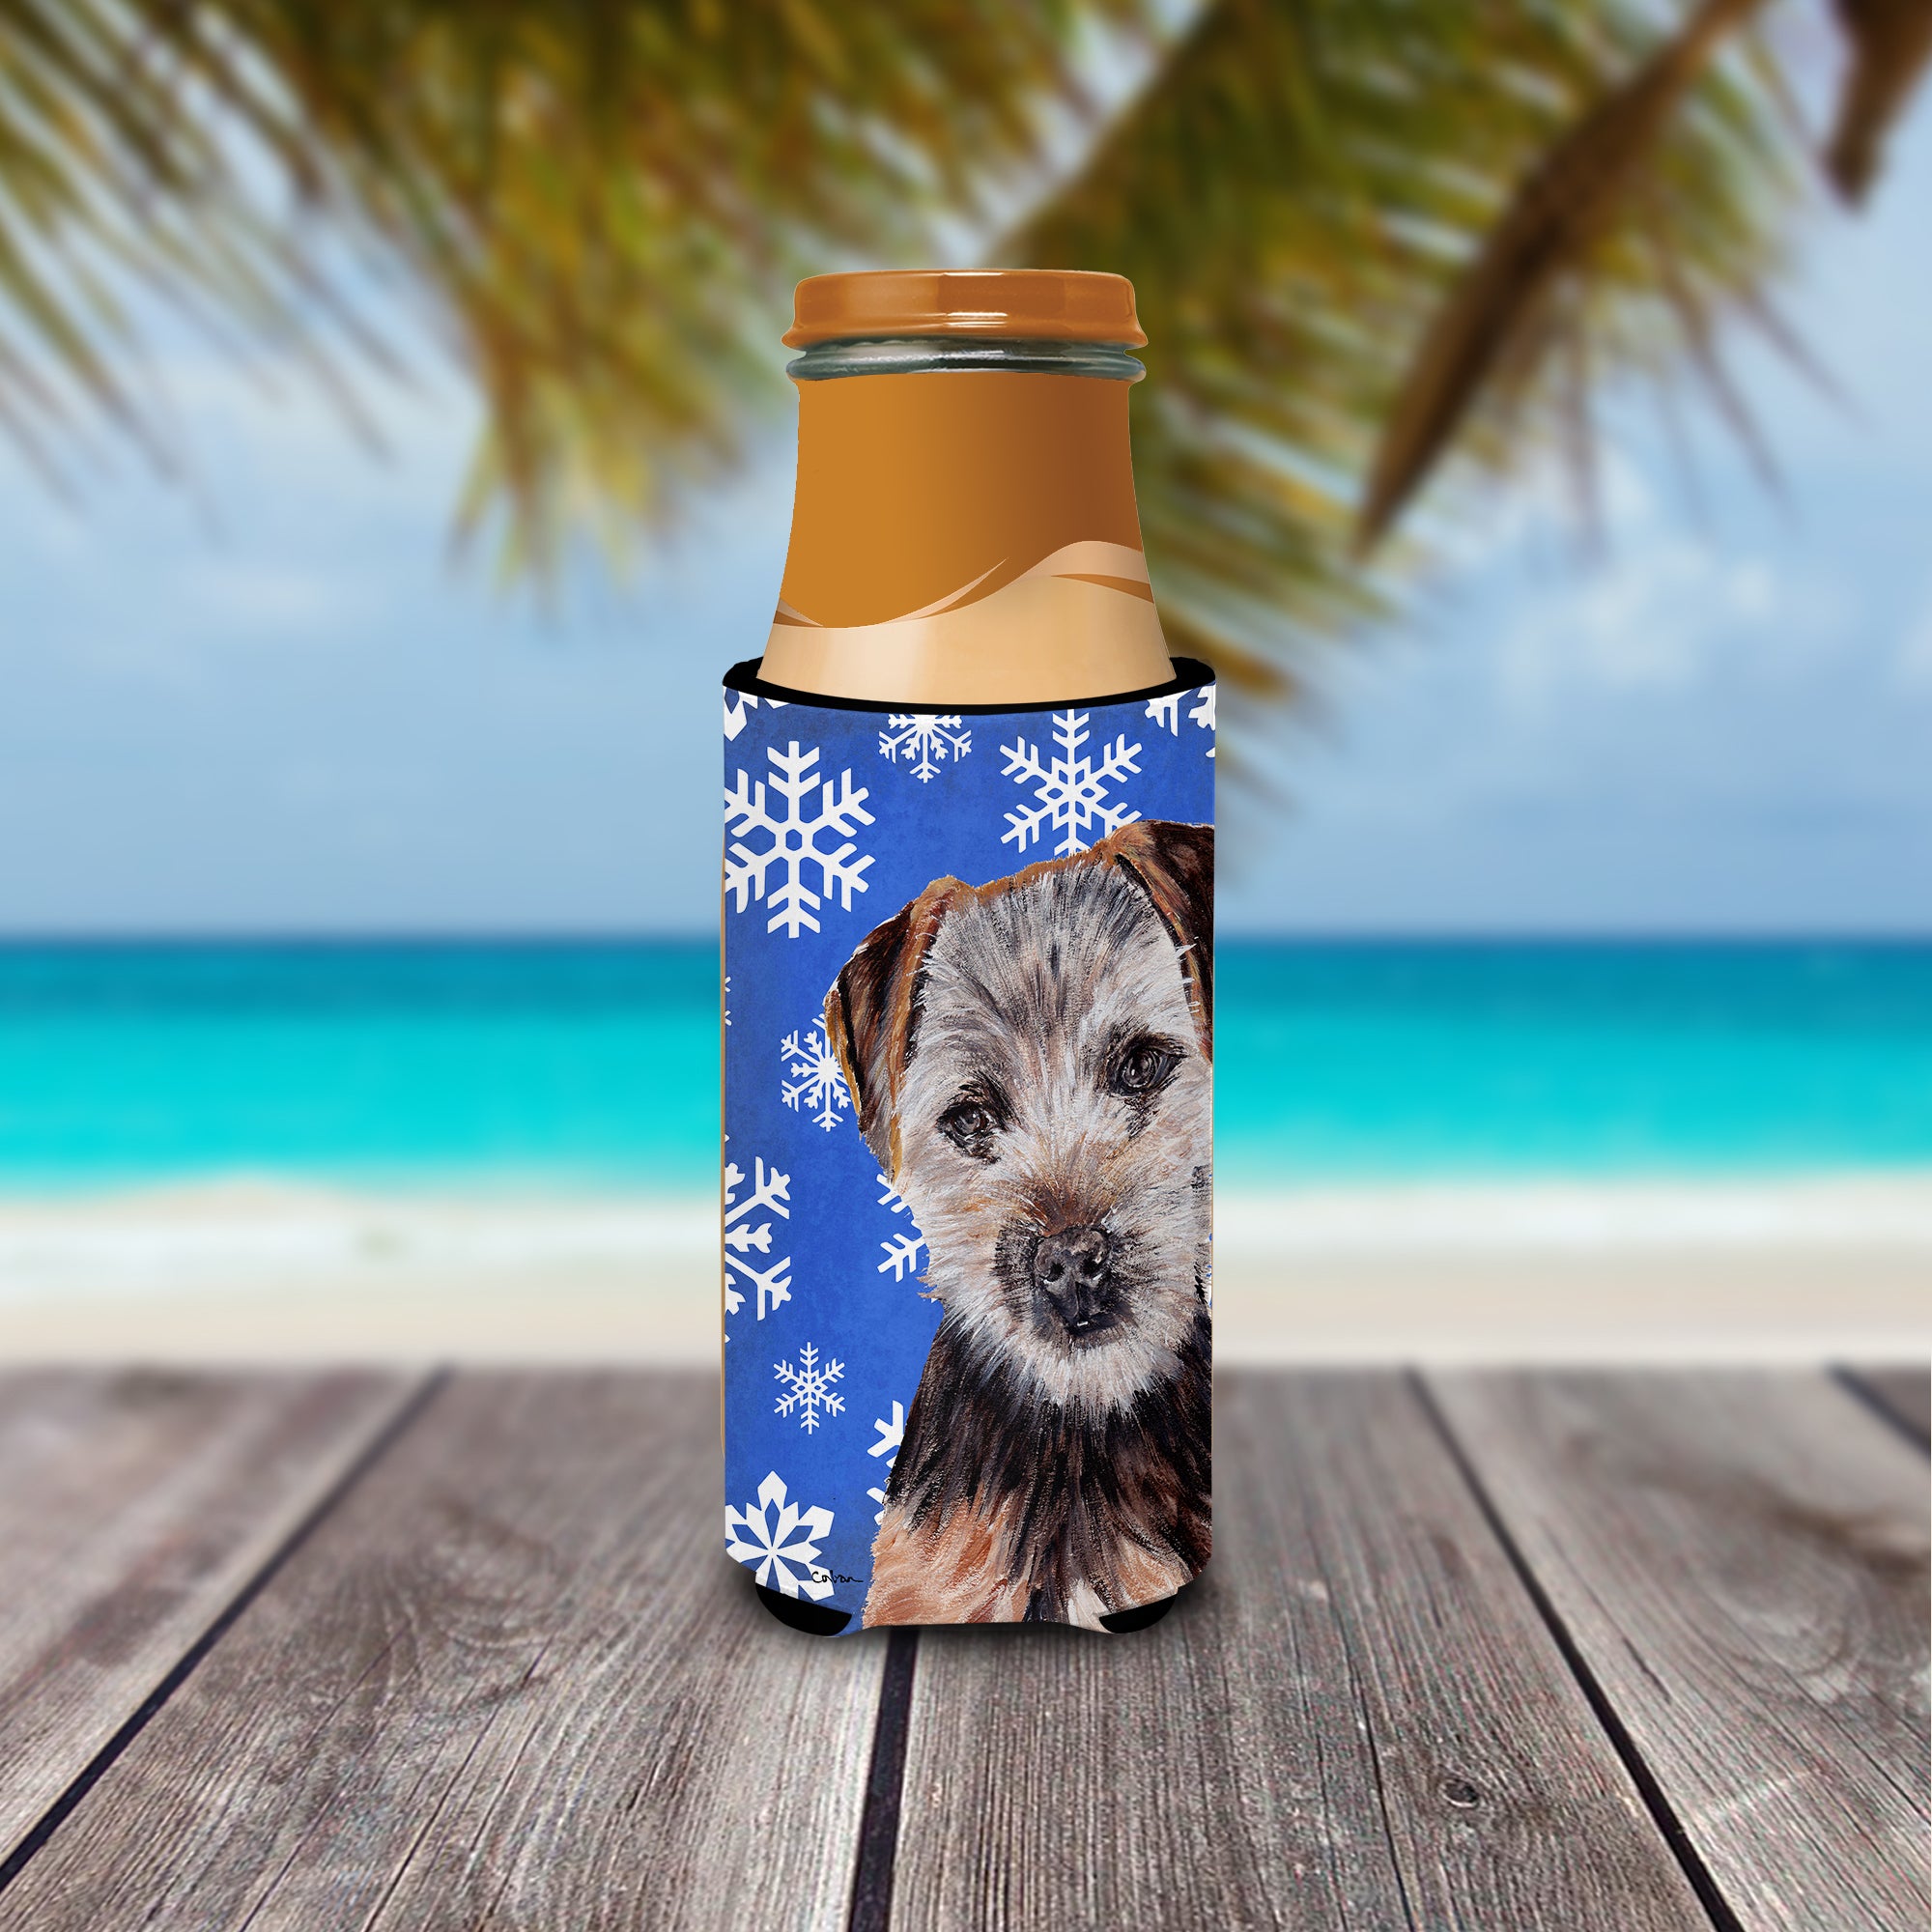 Norfolk Terrier Puppy Winter Snowflakes Ultra Beverage Insulators for slim cans SC9783MUK